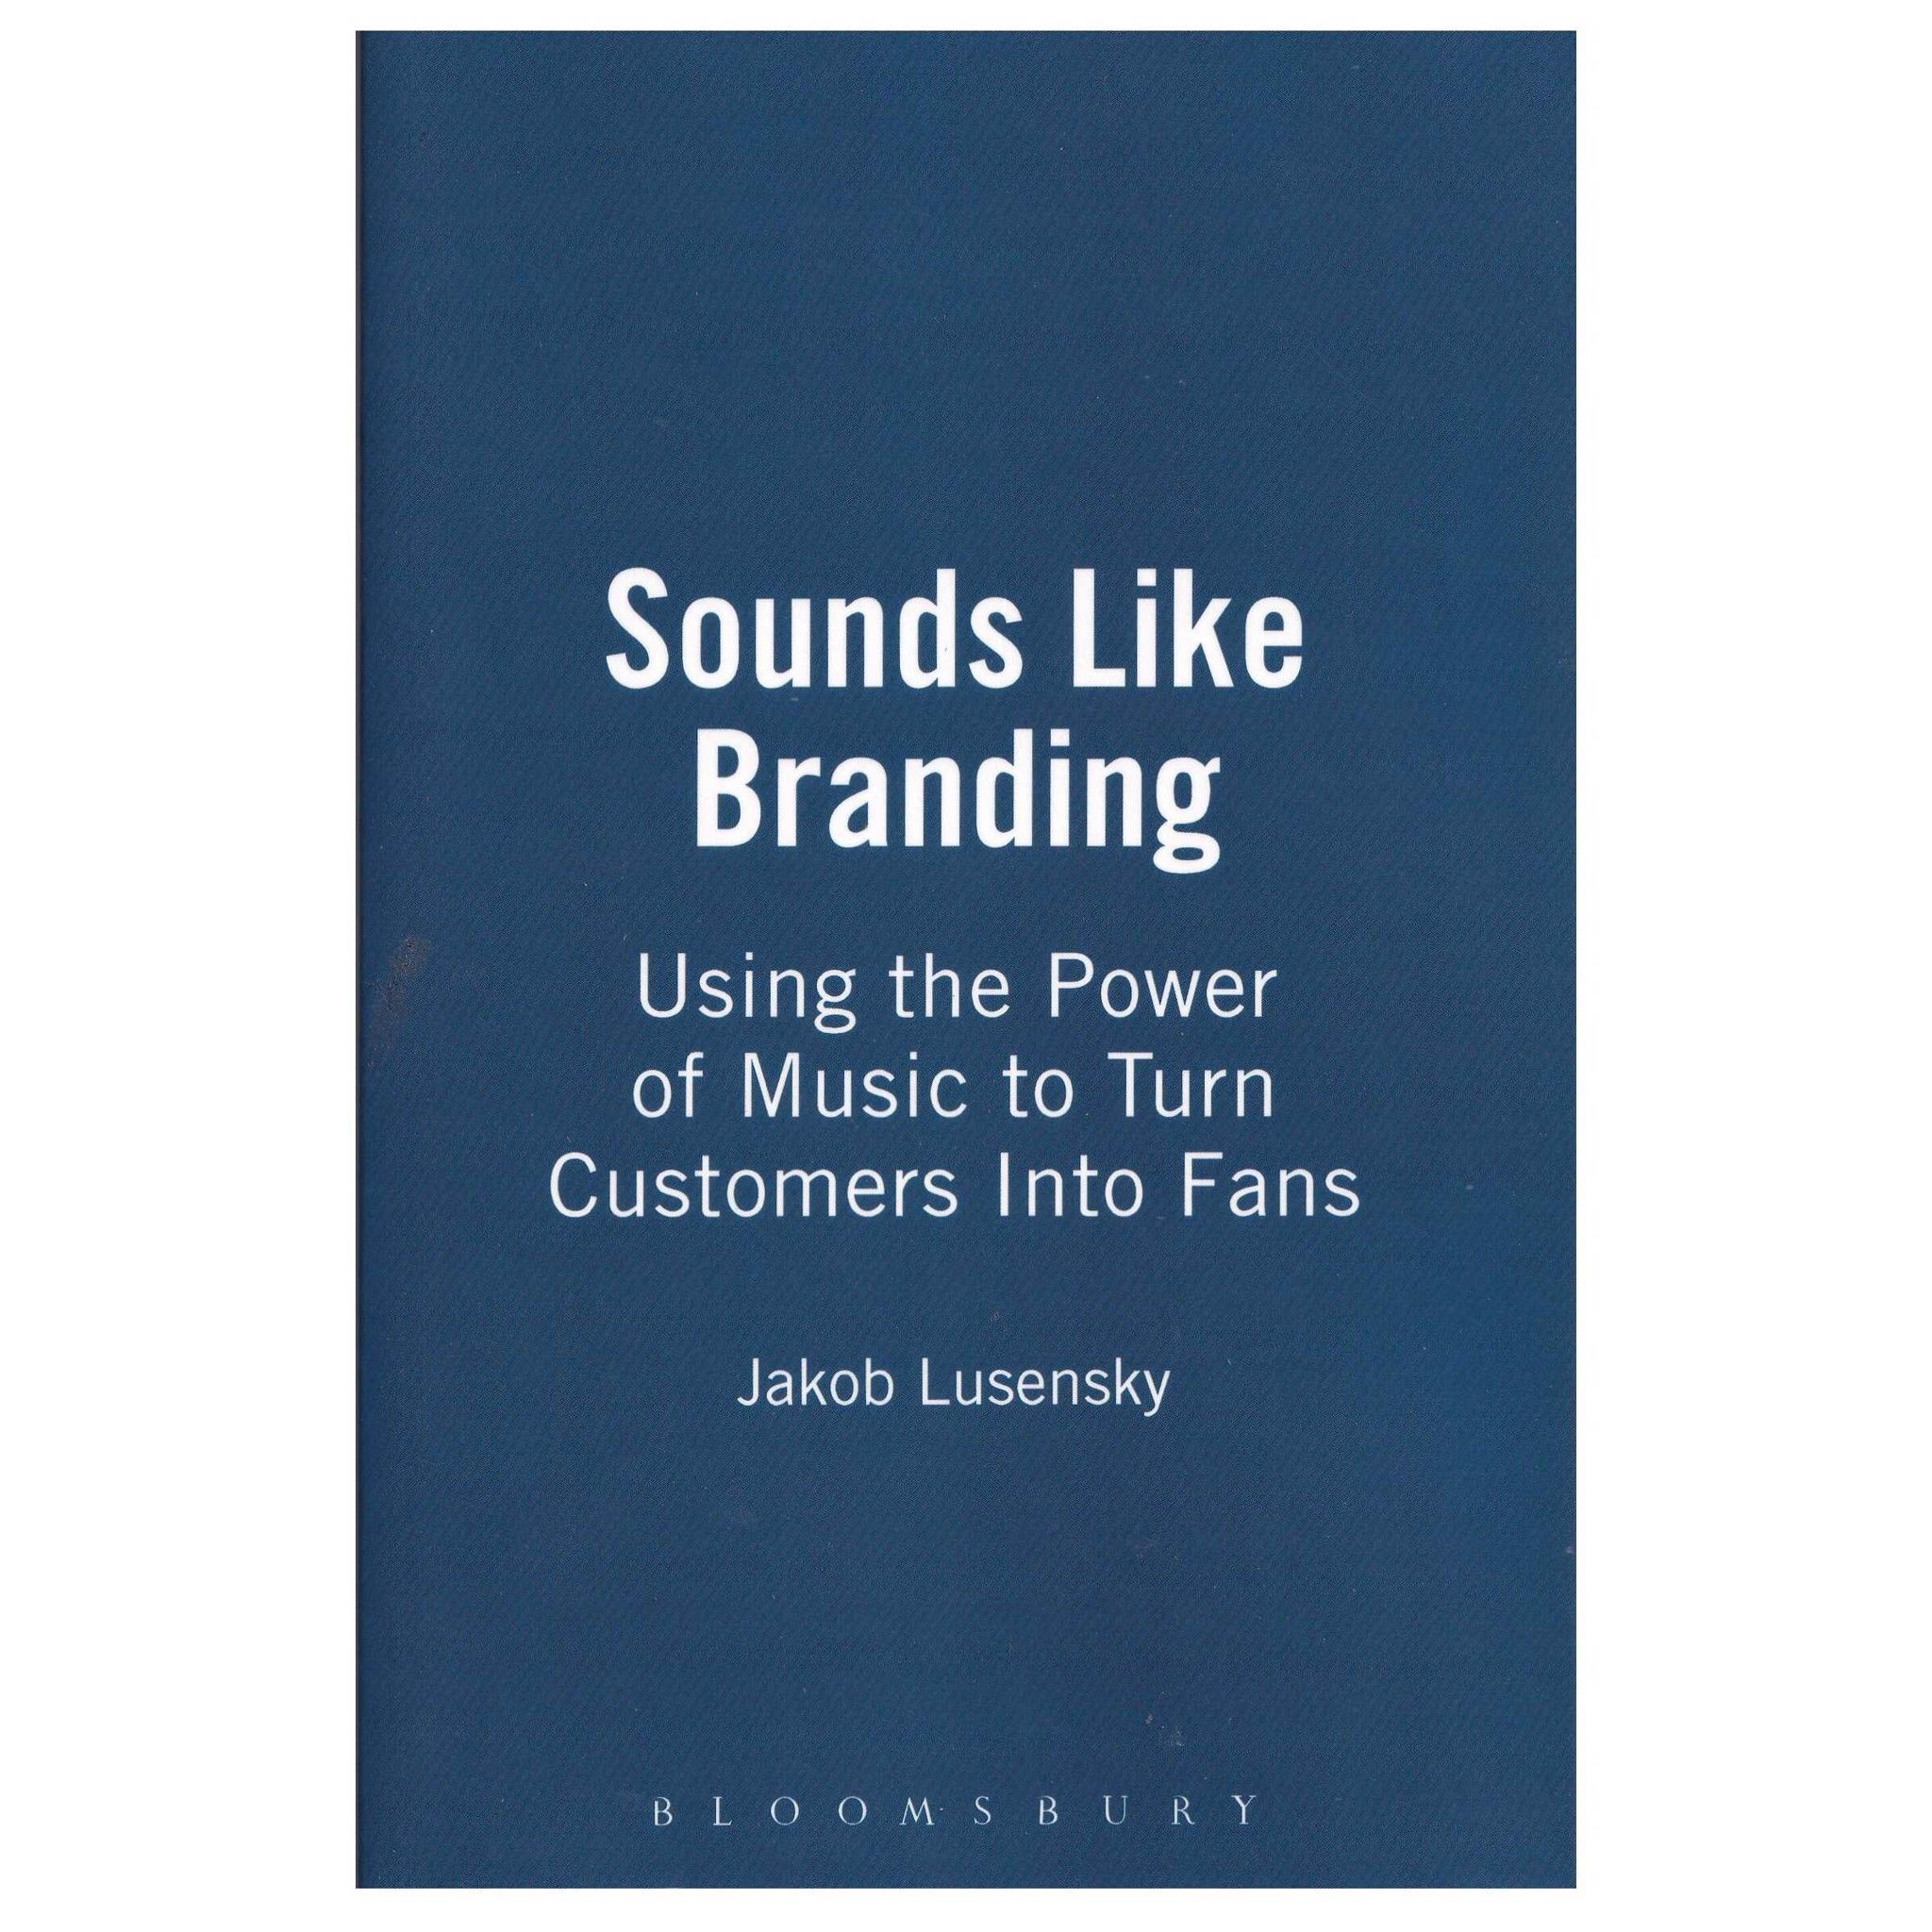 Sounds Like Branding Use the Power of Music to Turn Customers into Fans